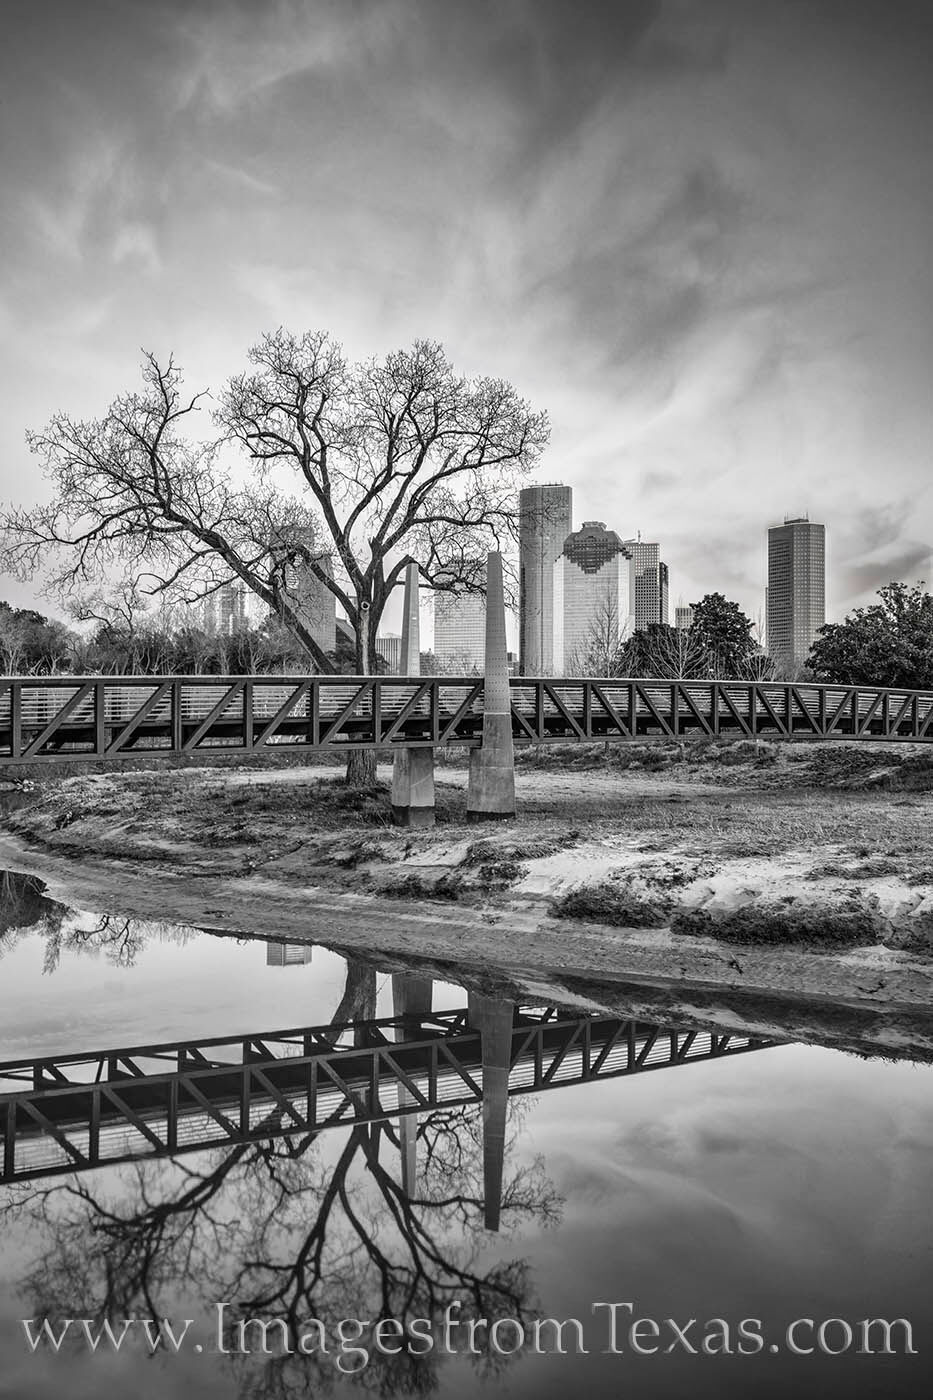 A cold winter evening embraces downtown Houston in this black and white photograph. Buffalo Bayou's waters are perfectly still...